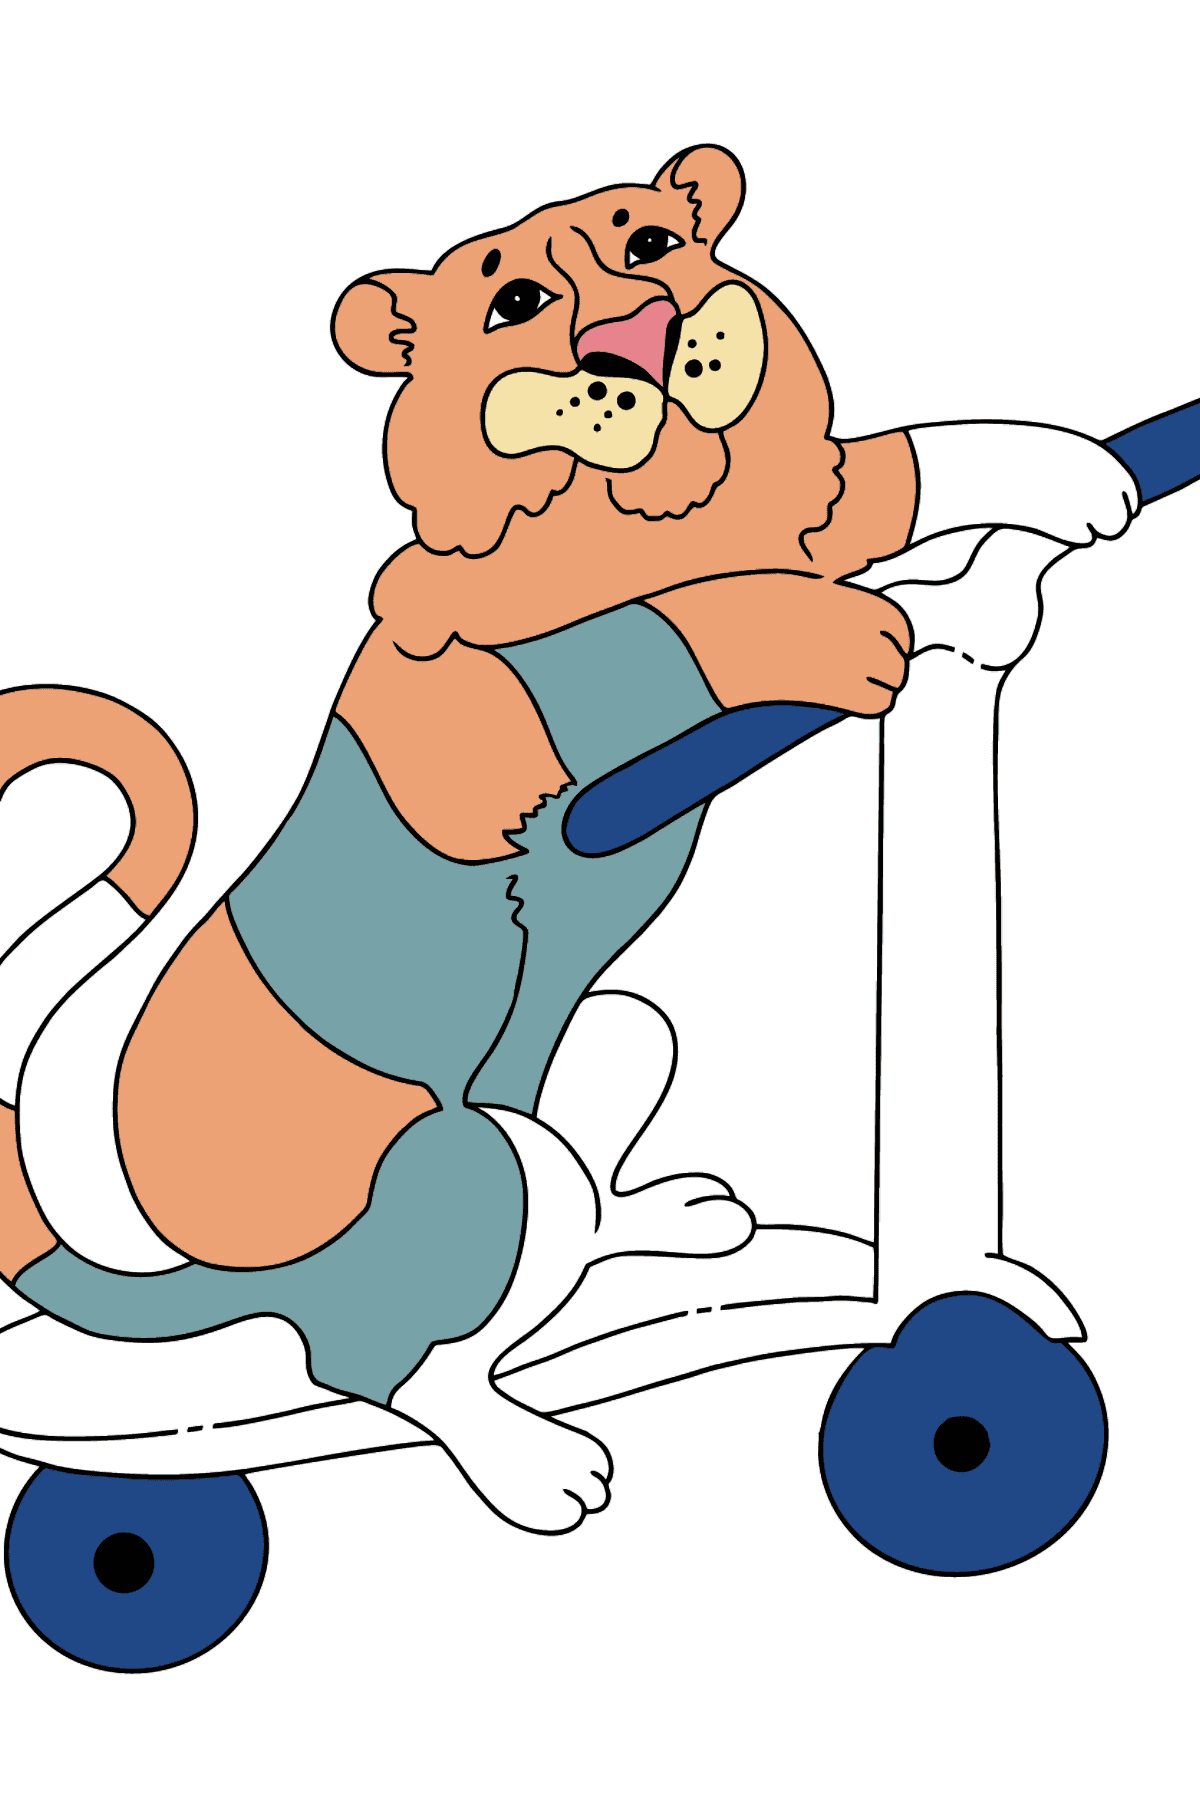 Coloring Page - A Tiger is Learning to Ride a Scooter - Coloring Pages for Kids